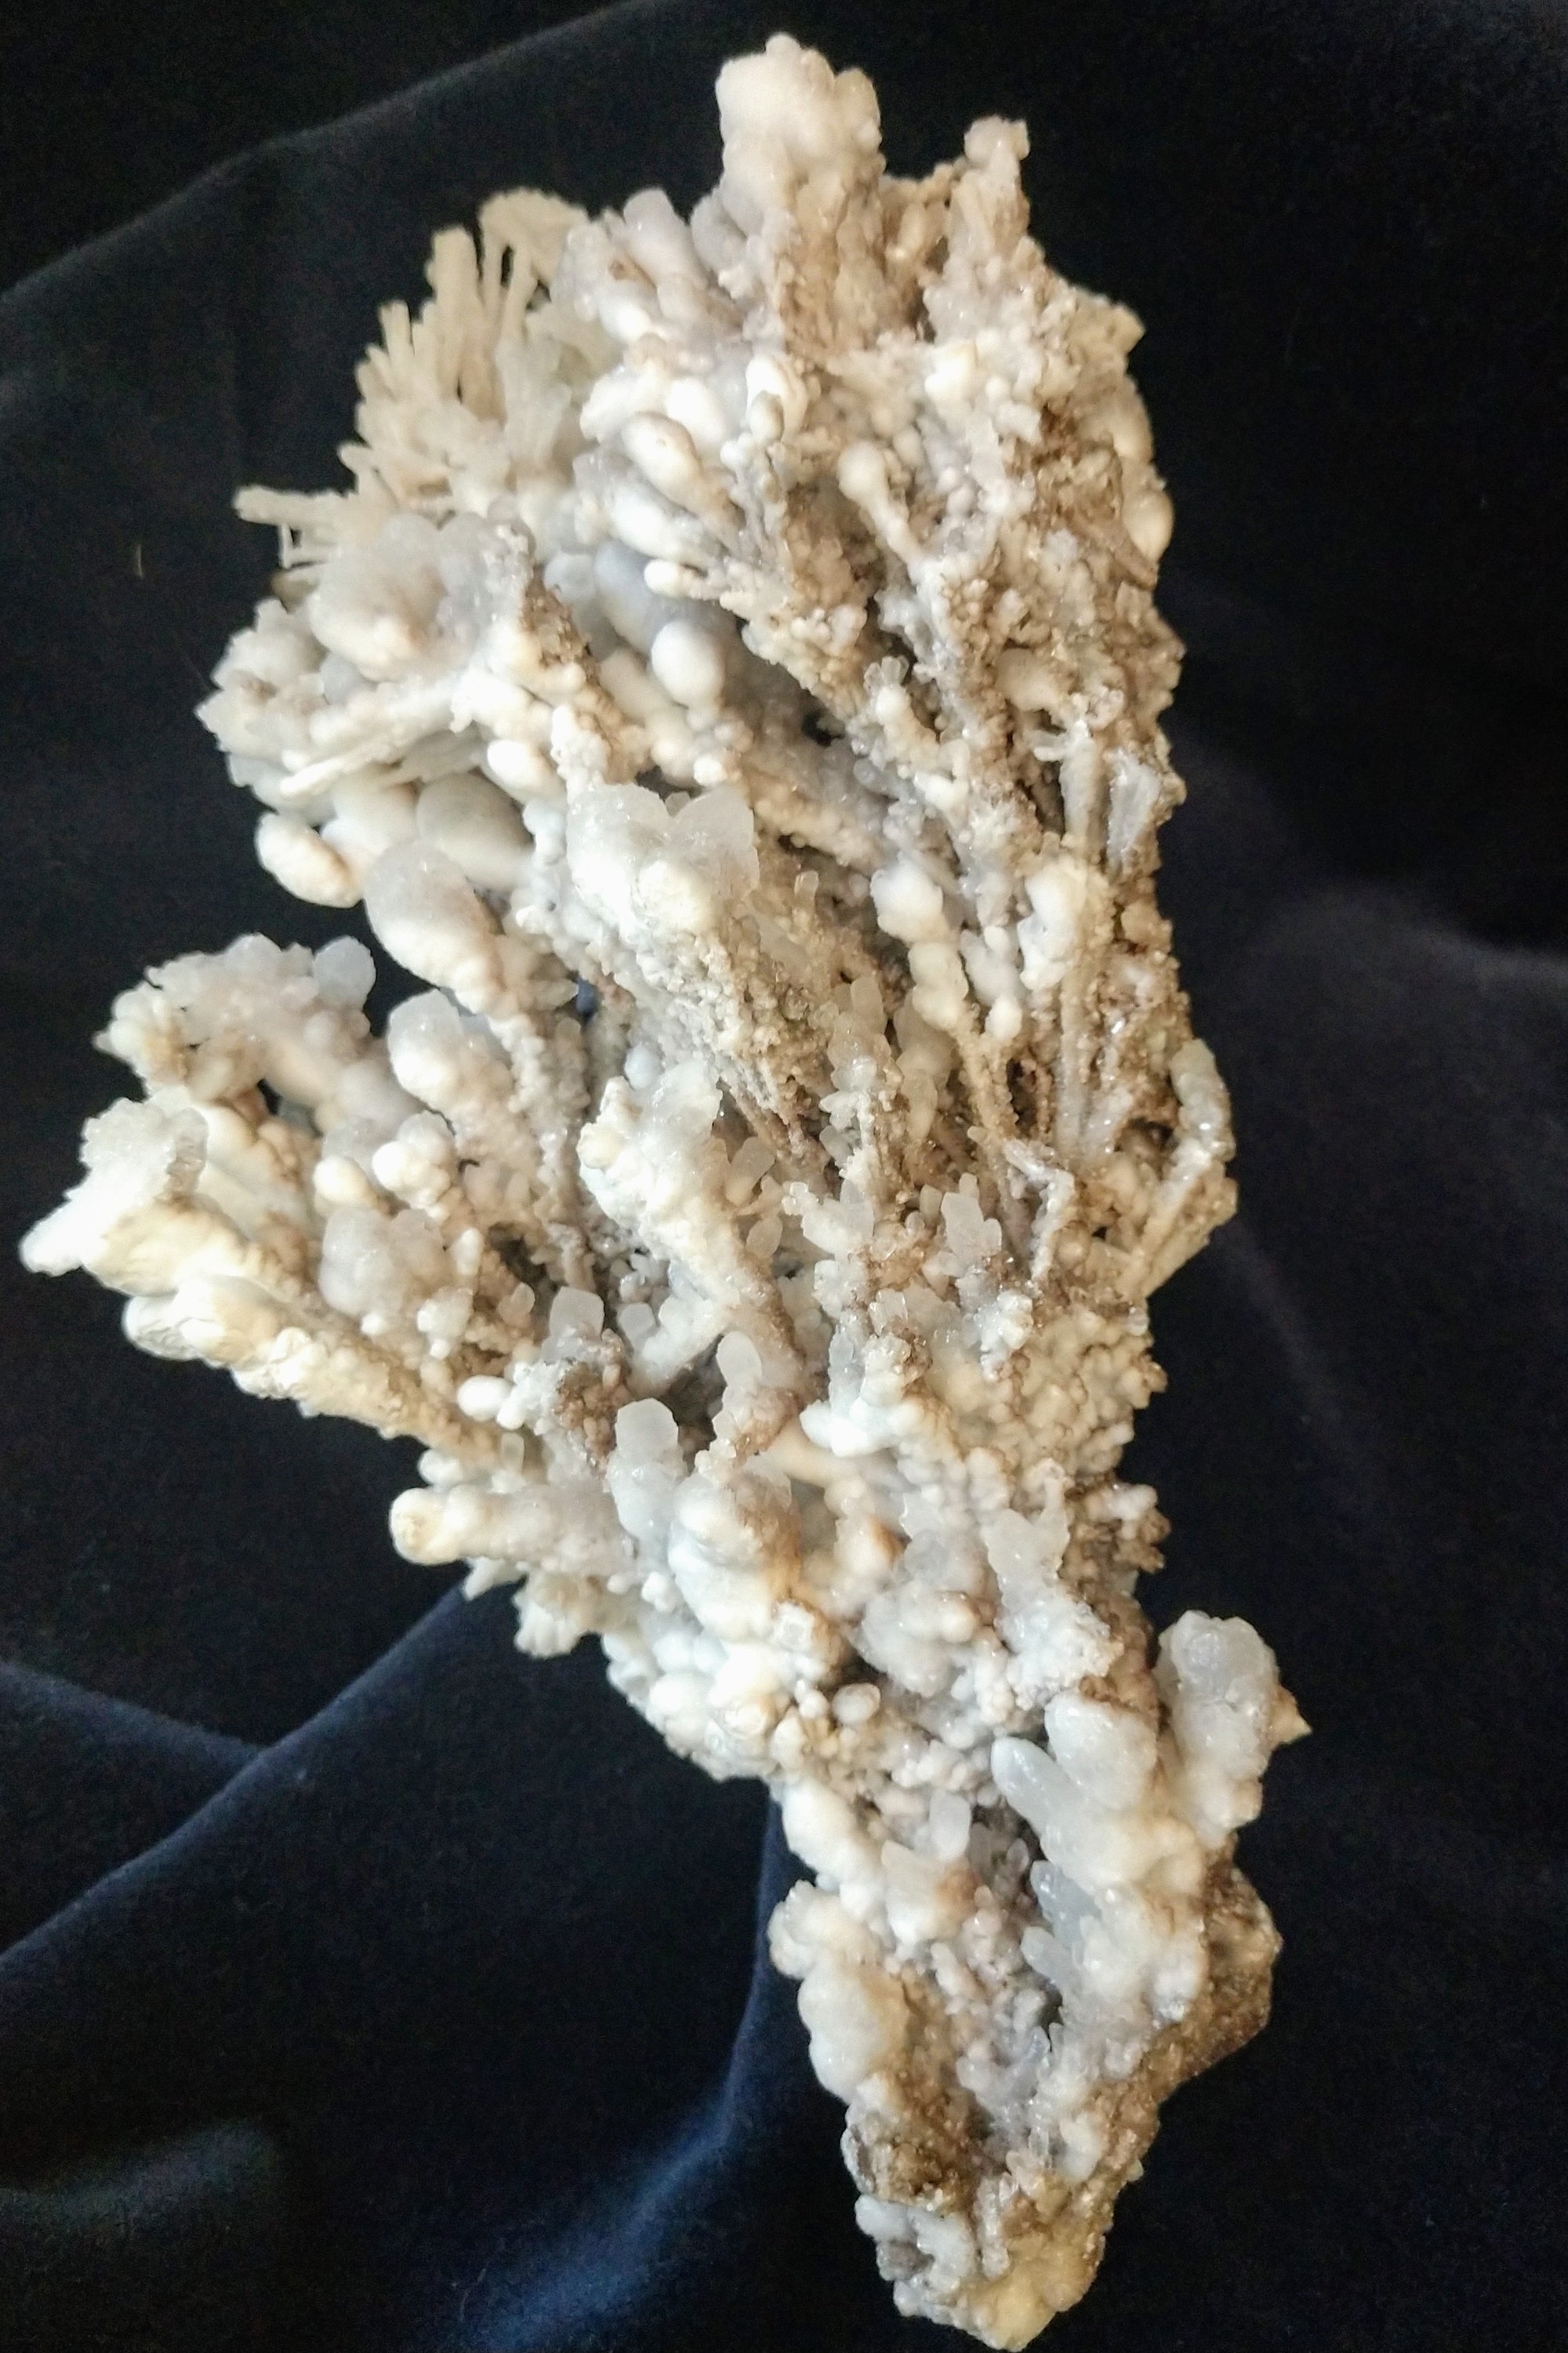 Aragonite from the Congo